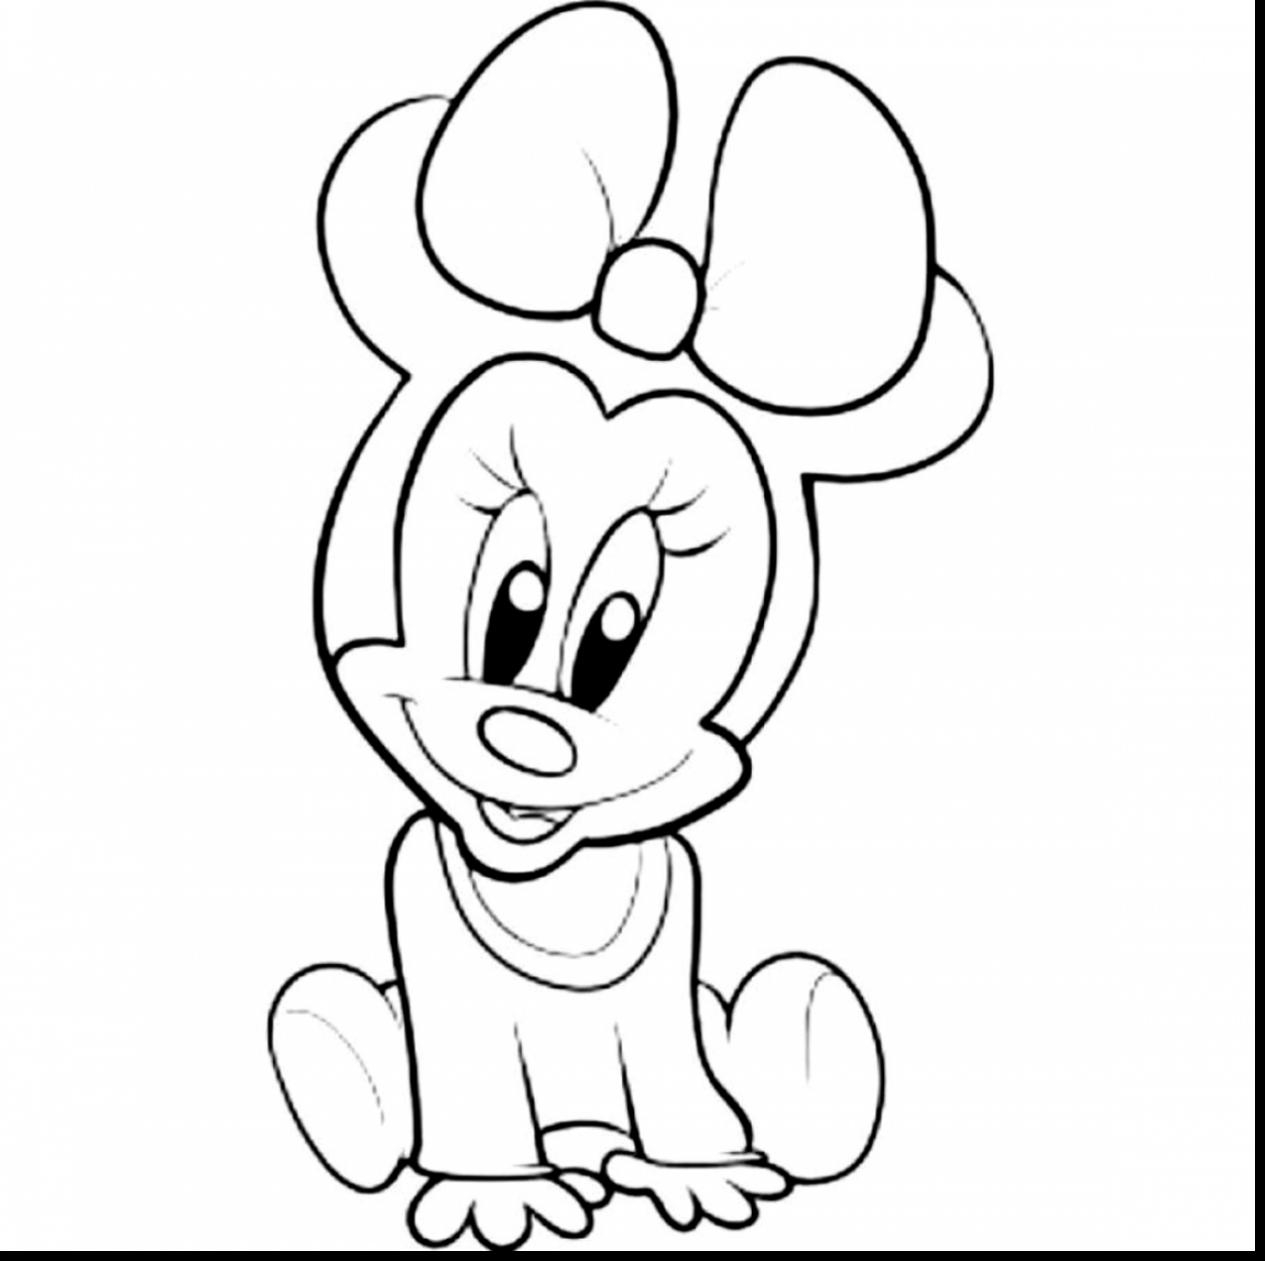 Free Baby Minnie Mouse Coloring Pages Coloring Ideas Minnie Mouse Coloring Ideas Free Mickey Pages Games